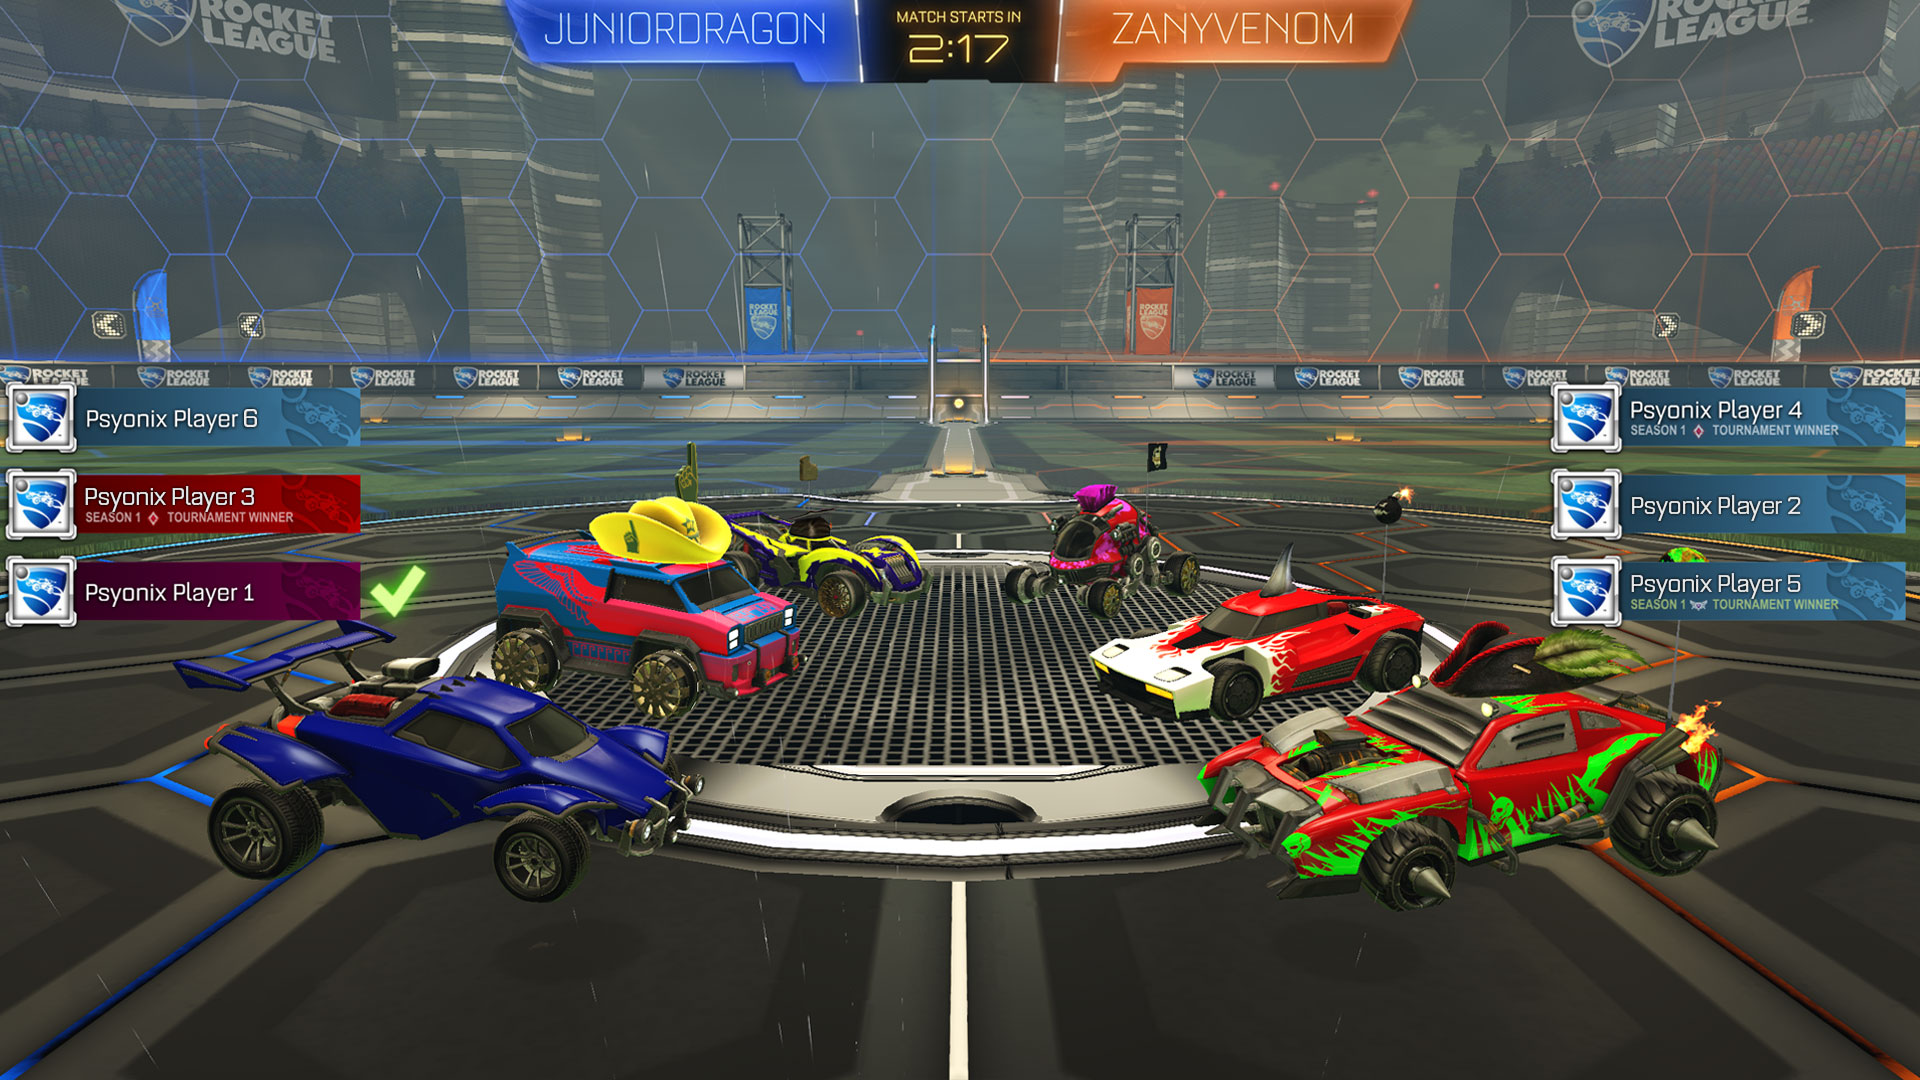 Rocket League on "Get ready for a new way to compete! Rocket League's Tournaments feature is getting a major overhaul in our next update. Our latest blog has everything you need